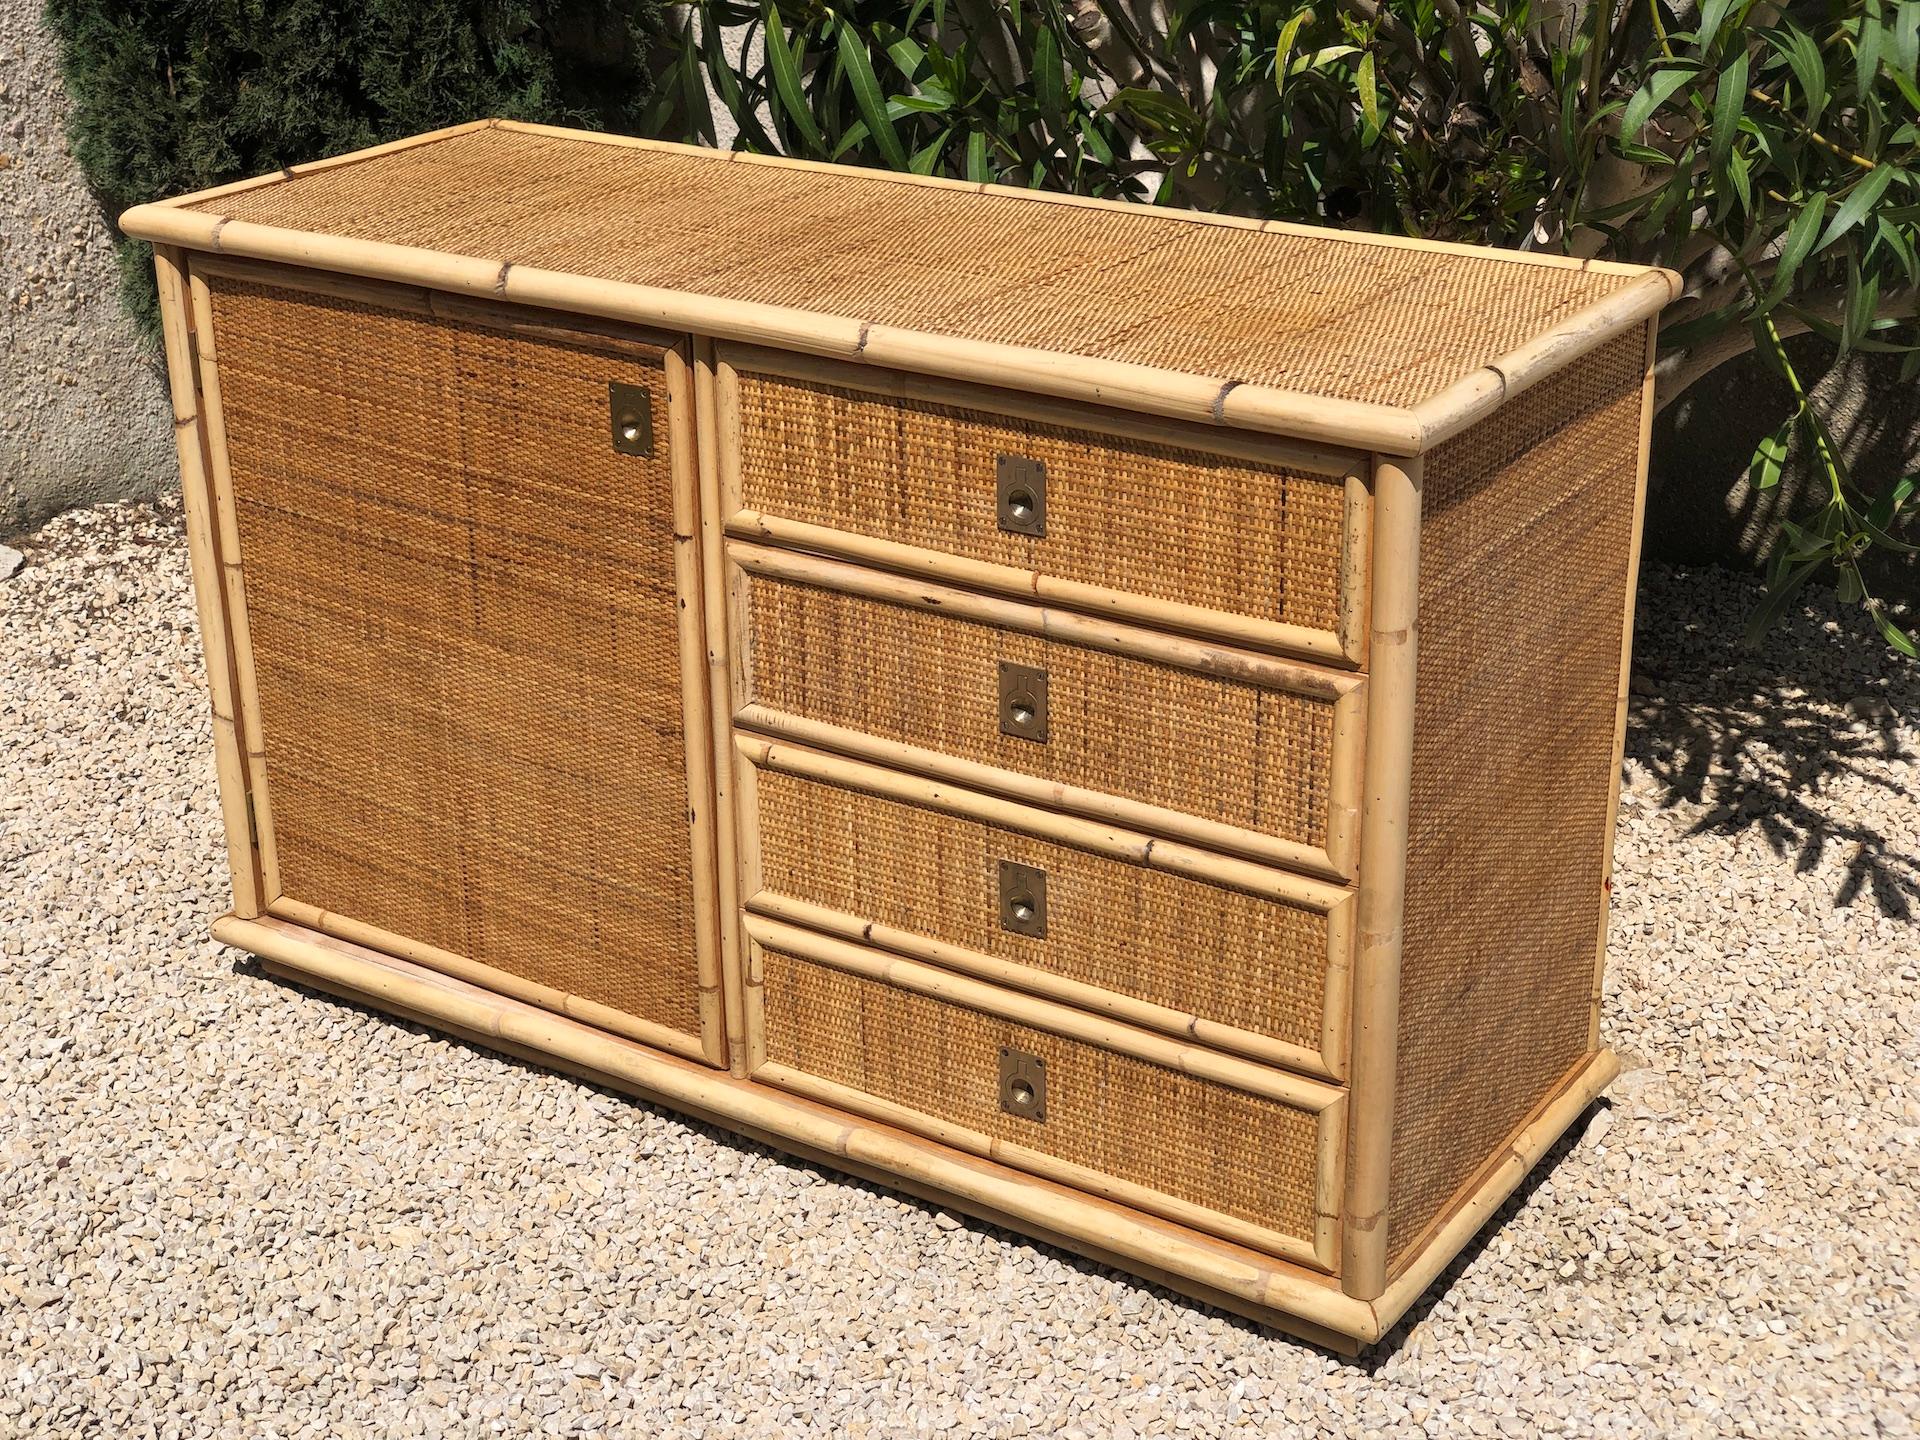 Italian sideboard in woven rattan and bamboo, brass handles dal vera 1970 comprising: 1 low cupboard and 4 drawers.
Good condition
Dimensions: H76 x W122 x D48